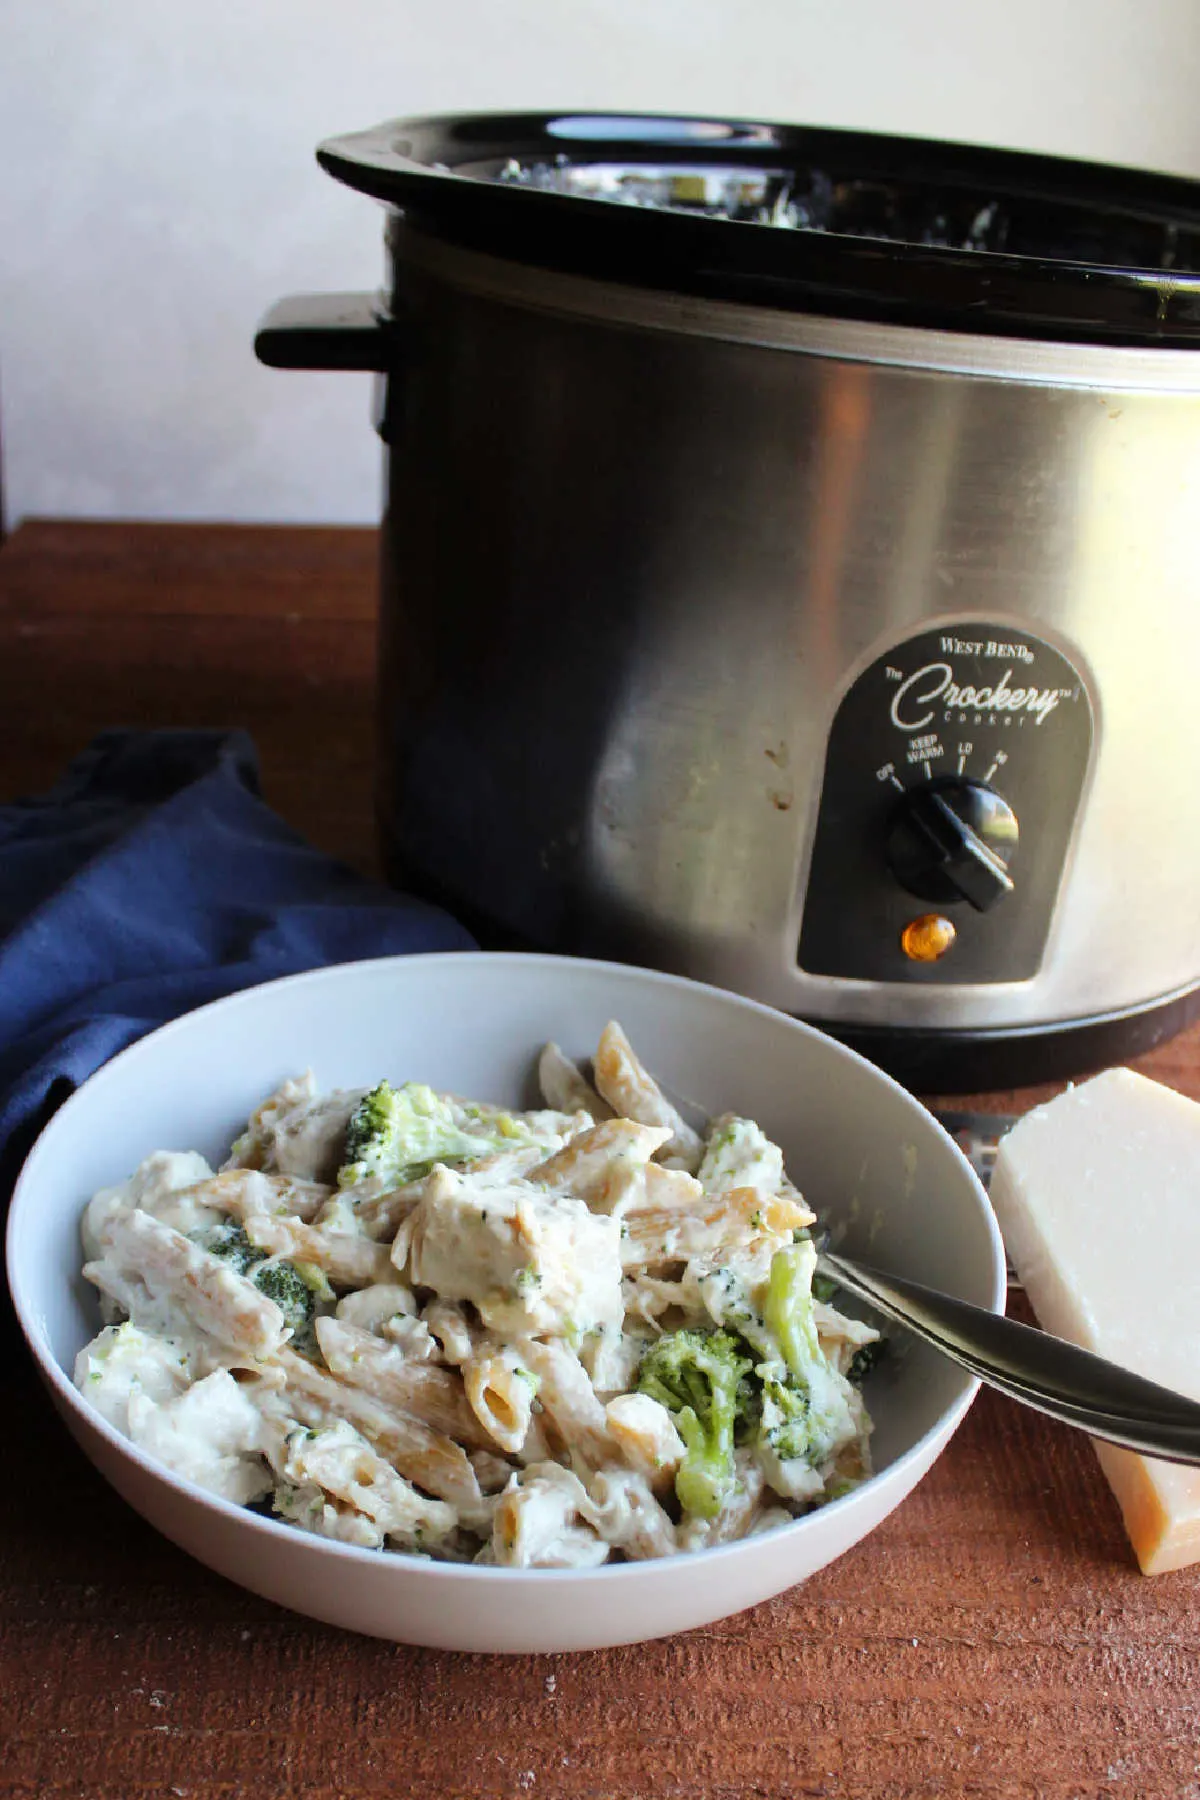 Bowl of pasta, chicken and broccoli coated in alfredo sauce in front of a crock pot.